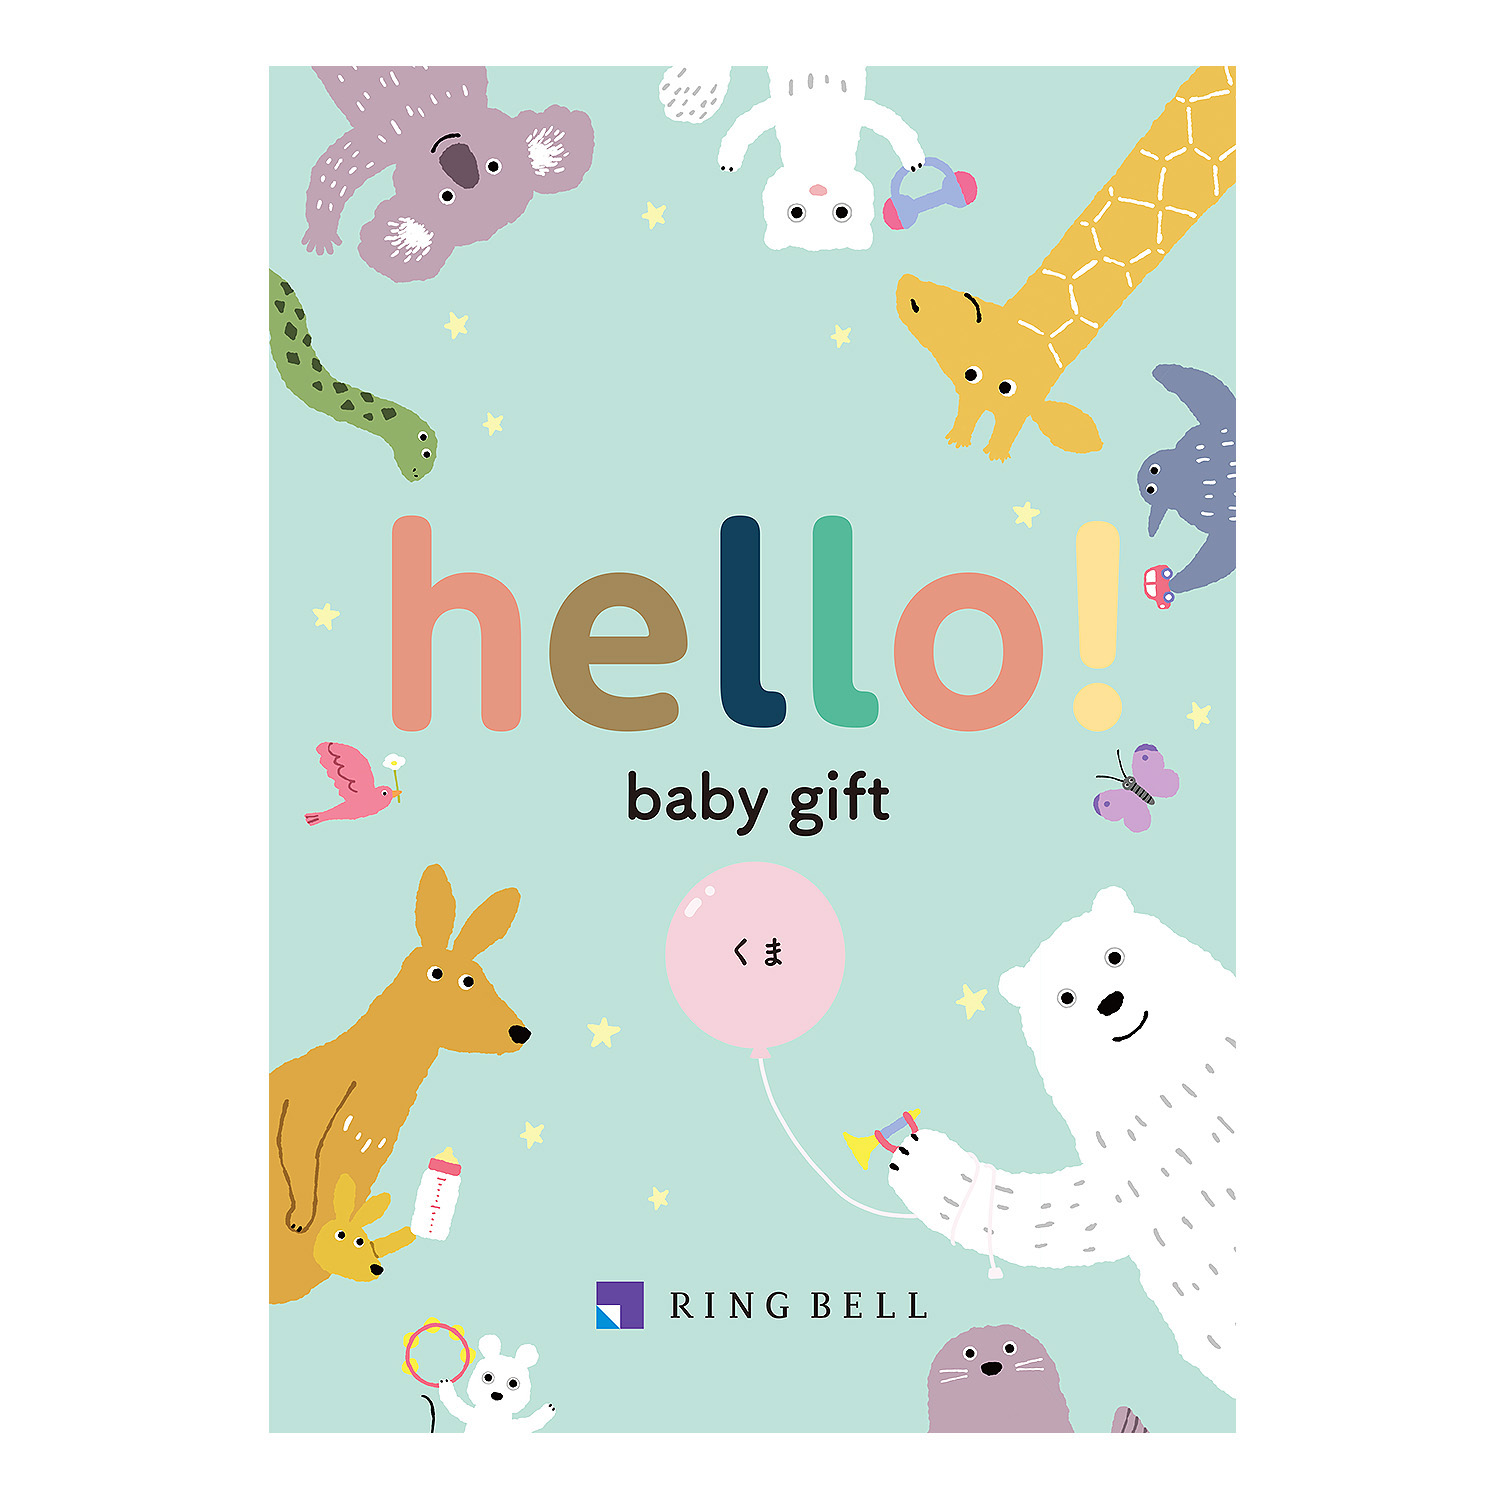 ≪hello! baby gift≫くまコース［出産祝い カタログギフト］